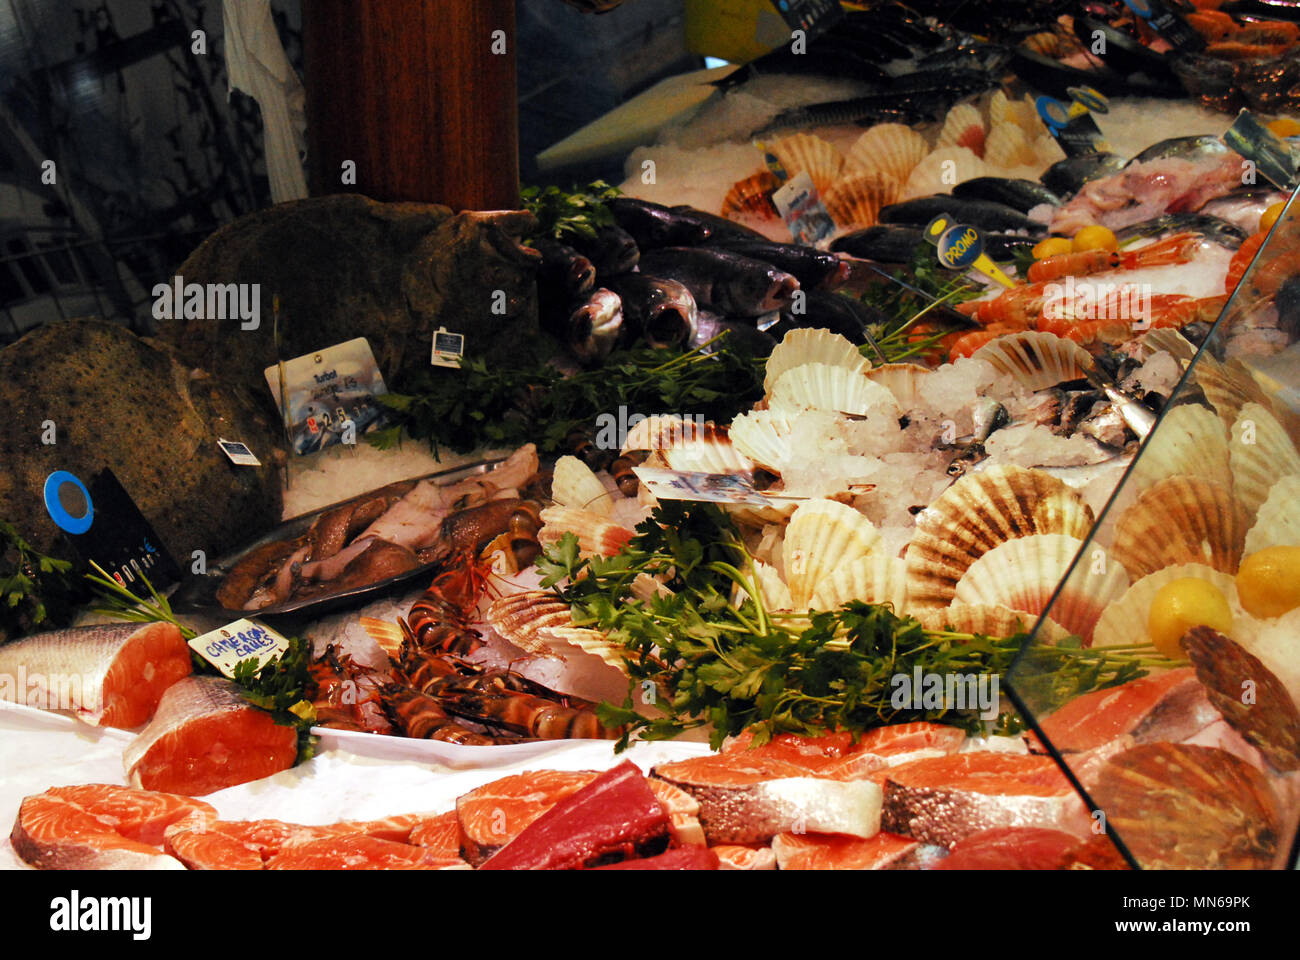 Delectable display of a variety of fresh seafood at a market in France. Stock Photo